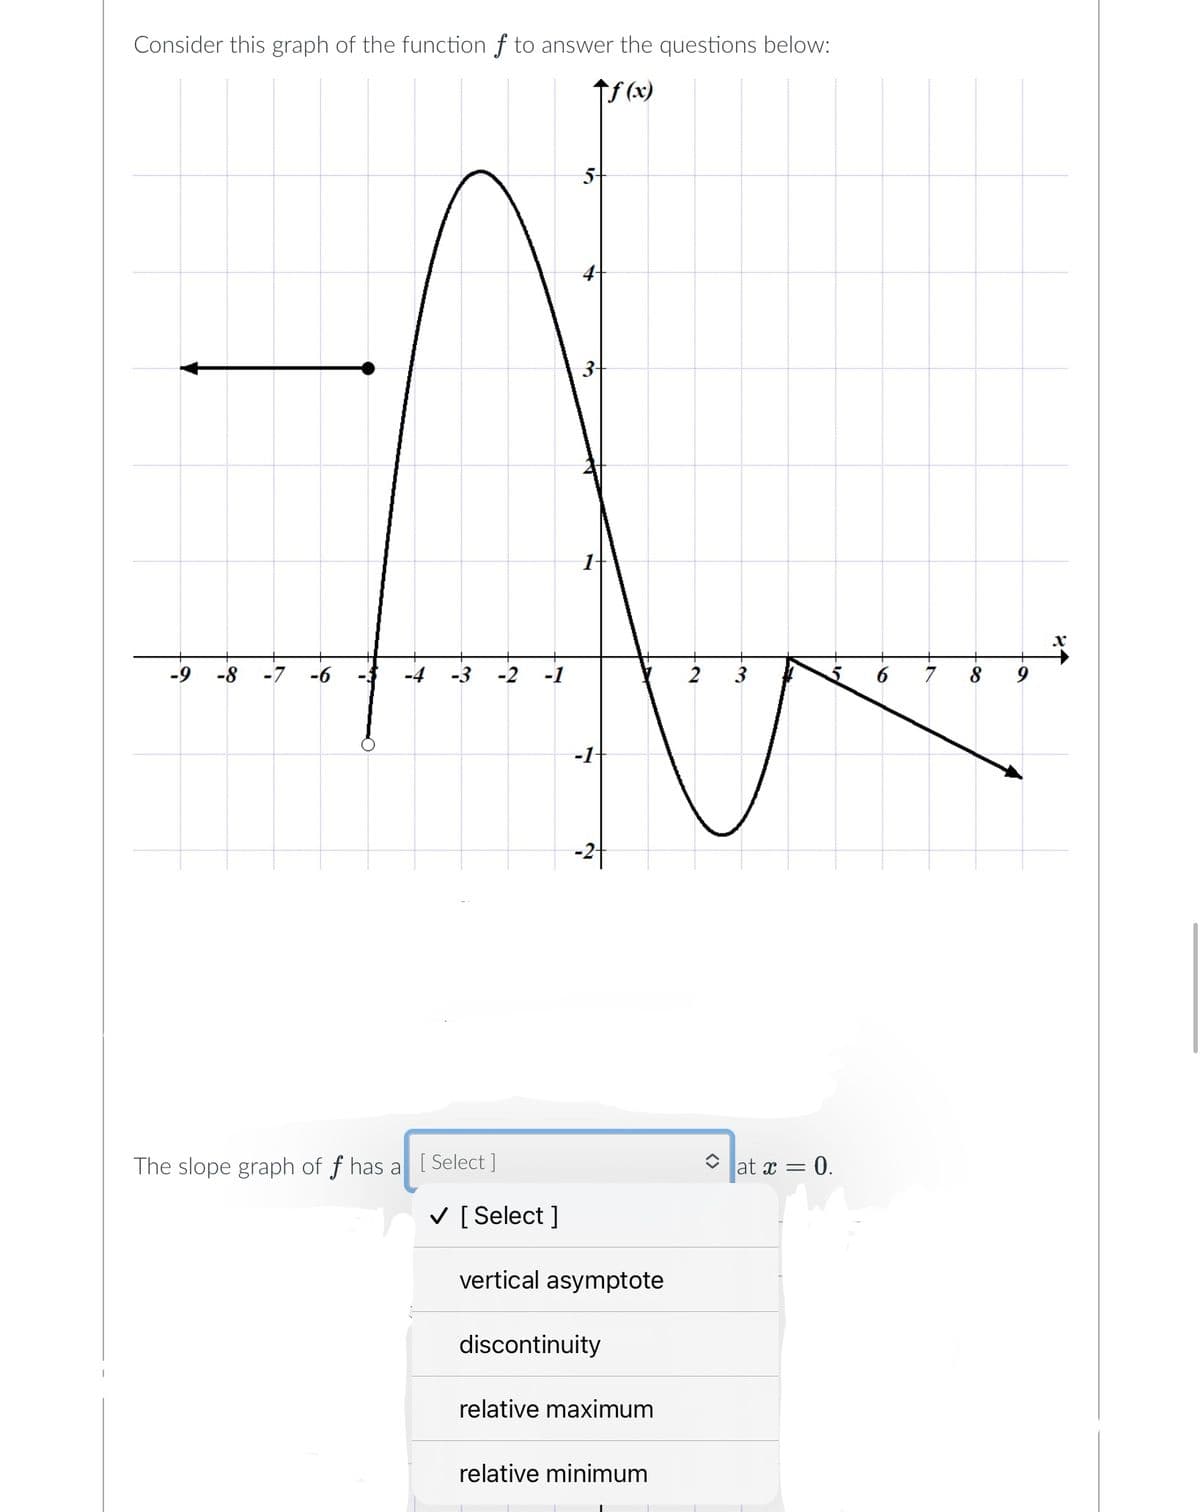 Consider this graph of the function f to answer the questions below:
↑f(x)
A
-9 -8 -7 -6
-1
3
The slope graph of f has a [Select]
✓ [Select]
+
-2+
vertical asymptote
discontinuity
relative maximum
relative minimum
◆ at x = 0.